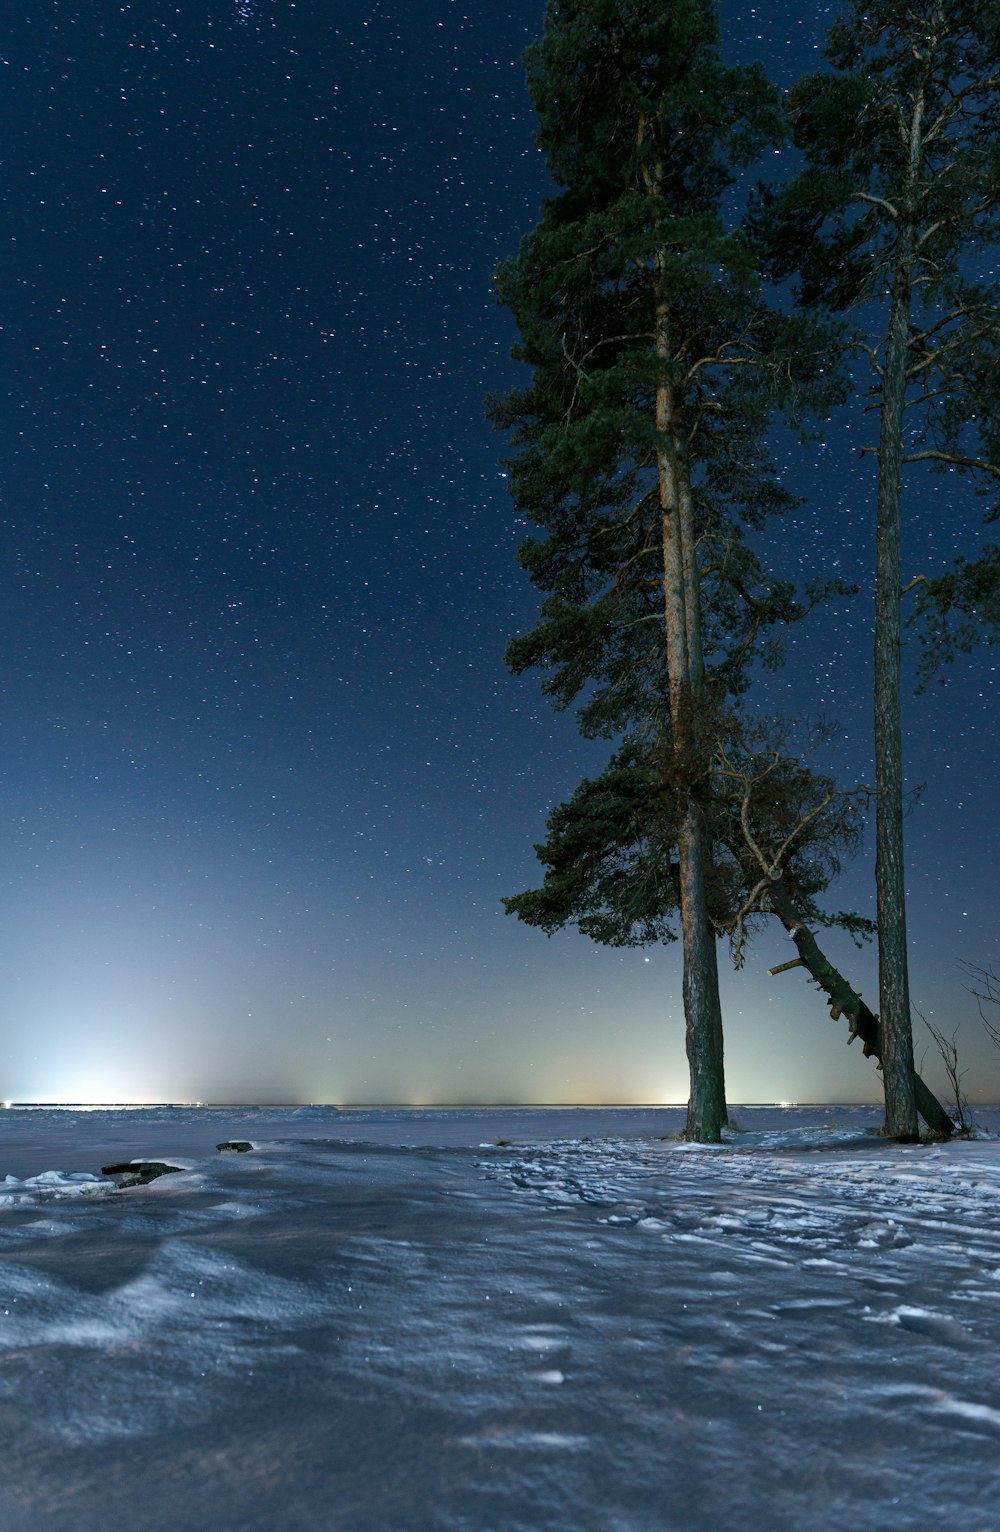 a night time scene of a snow covered field with trees